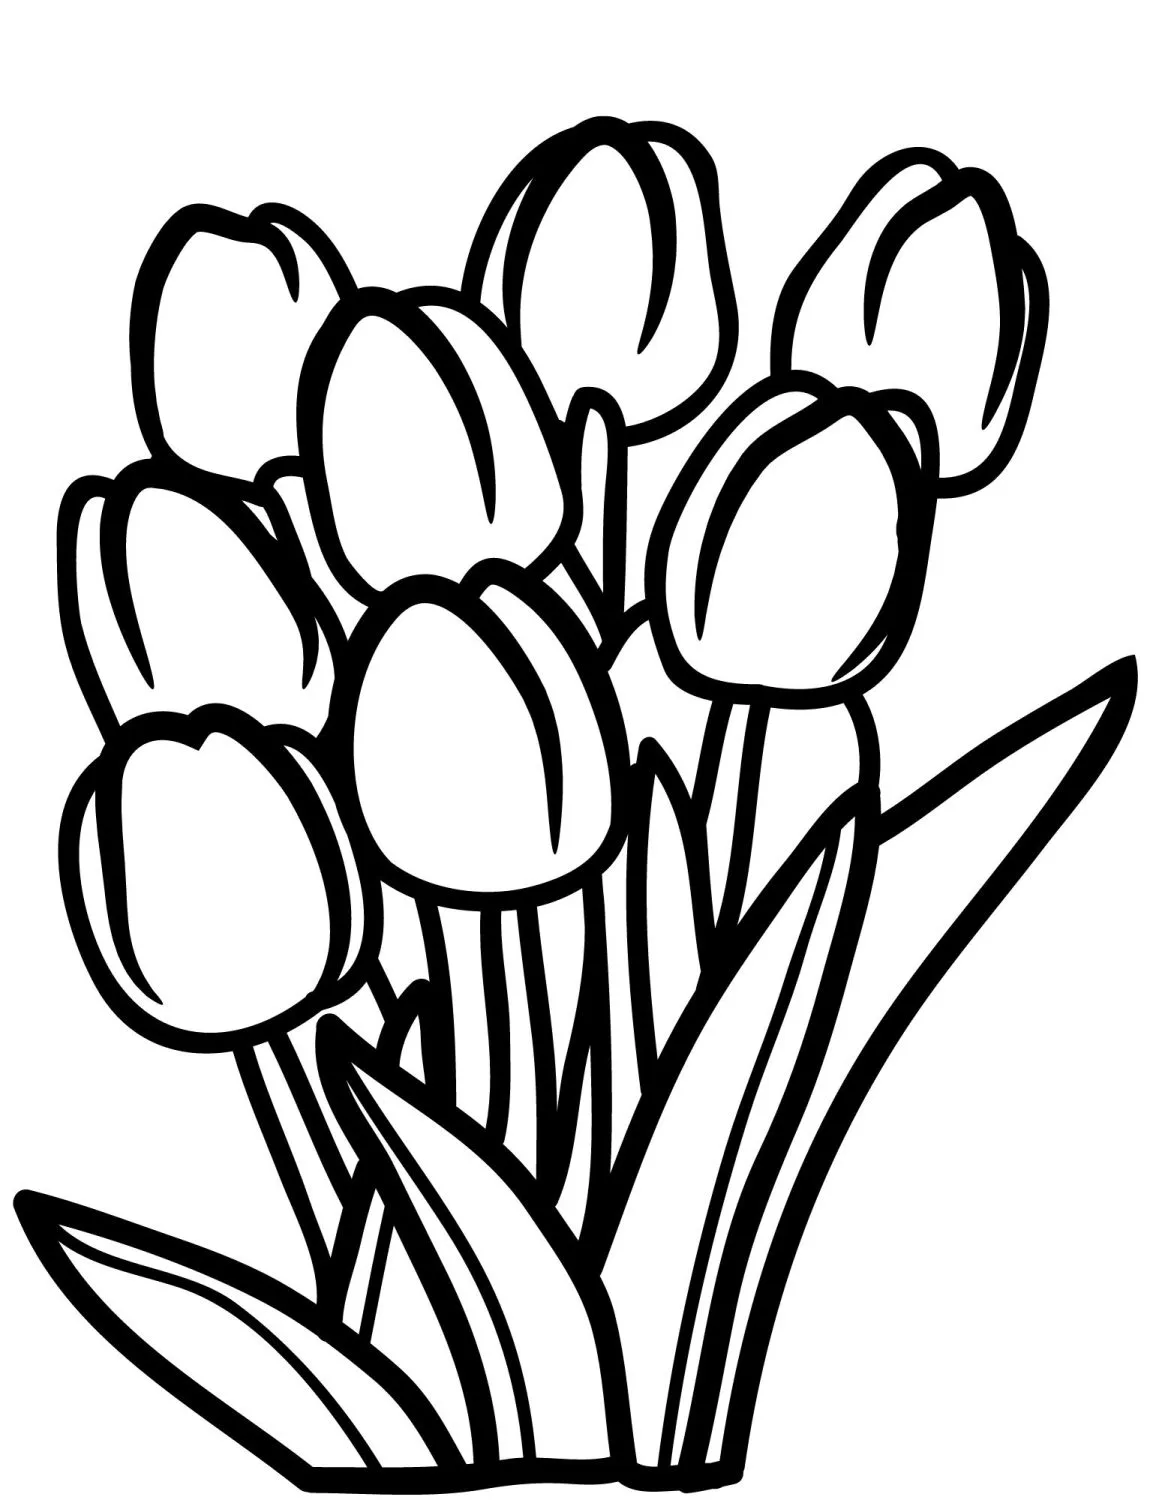 Tulip bouquet coloring page for kids.